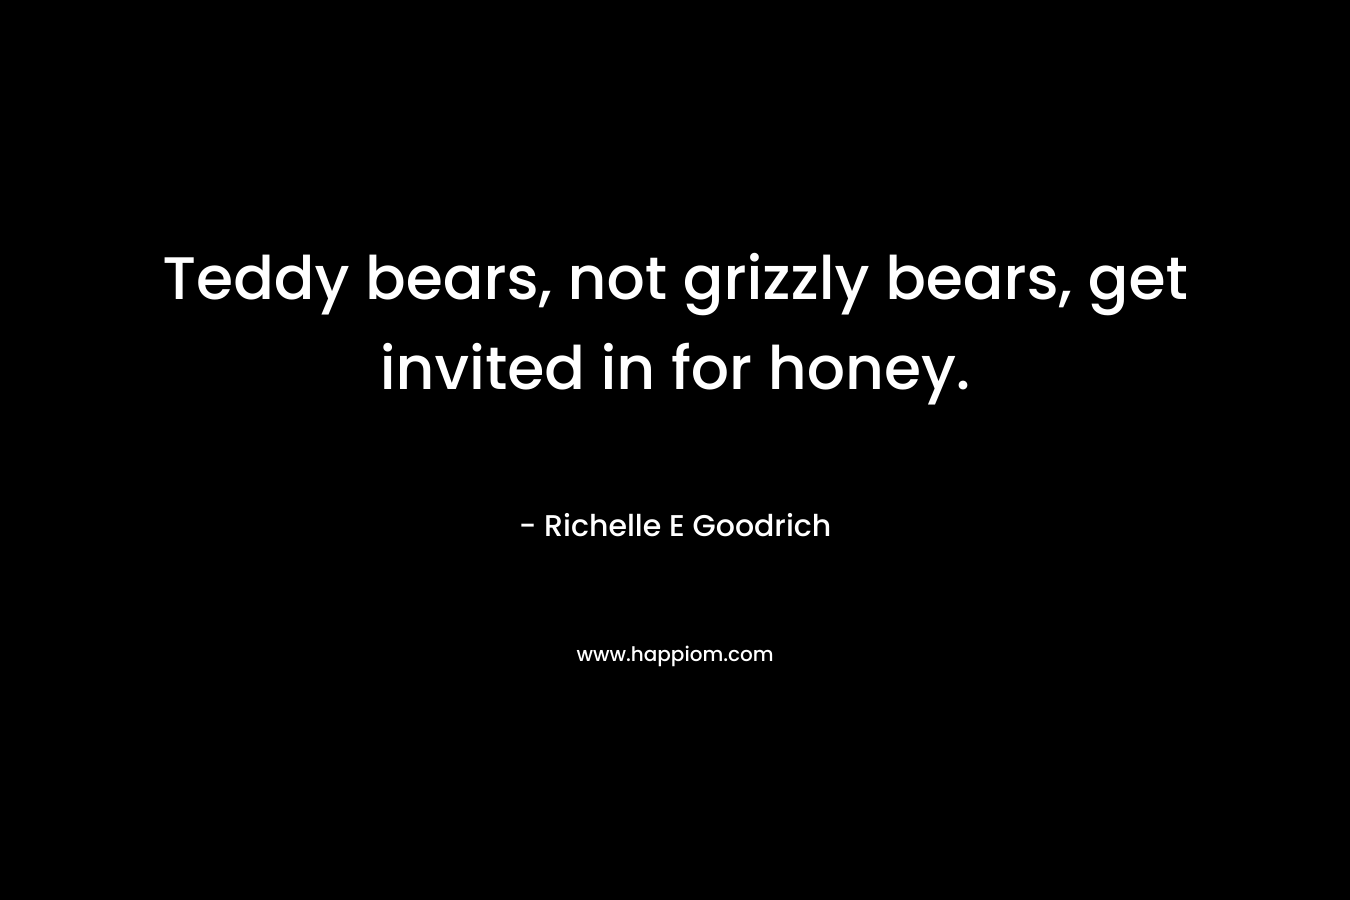 Teddy bears, not grizzly bears, get invited in for honey.